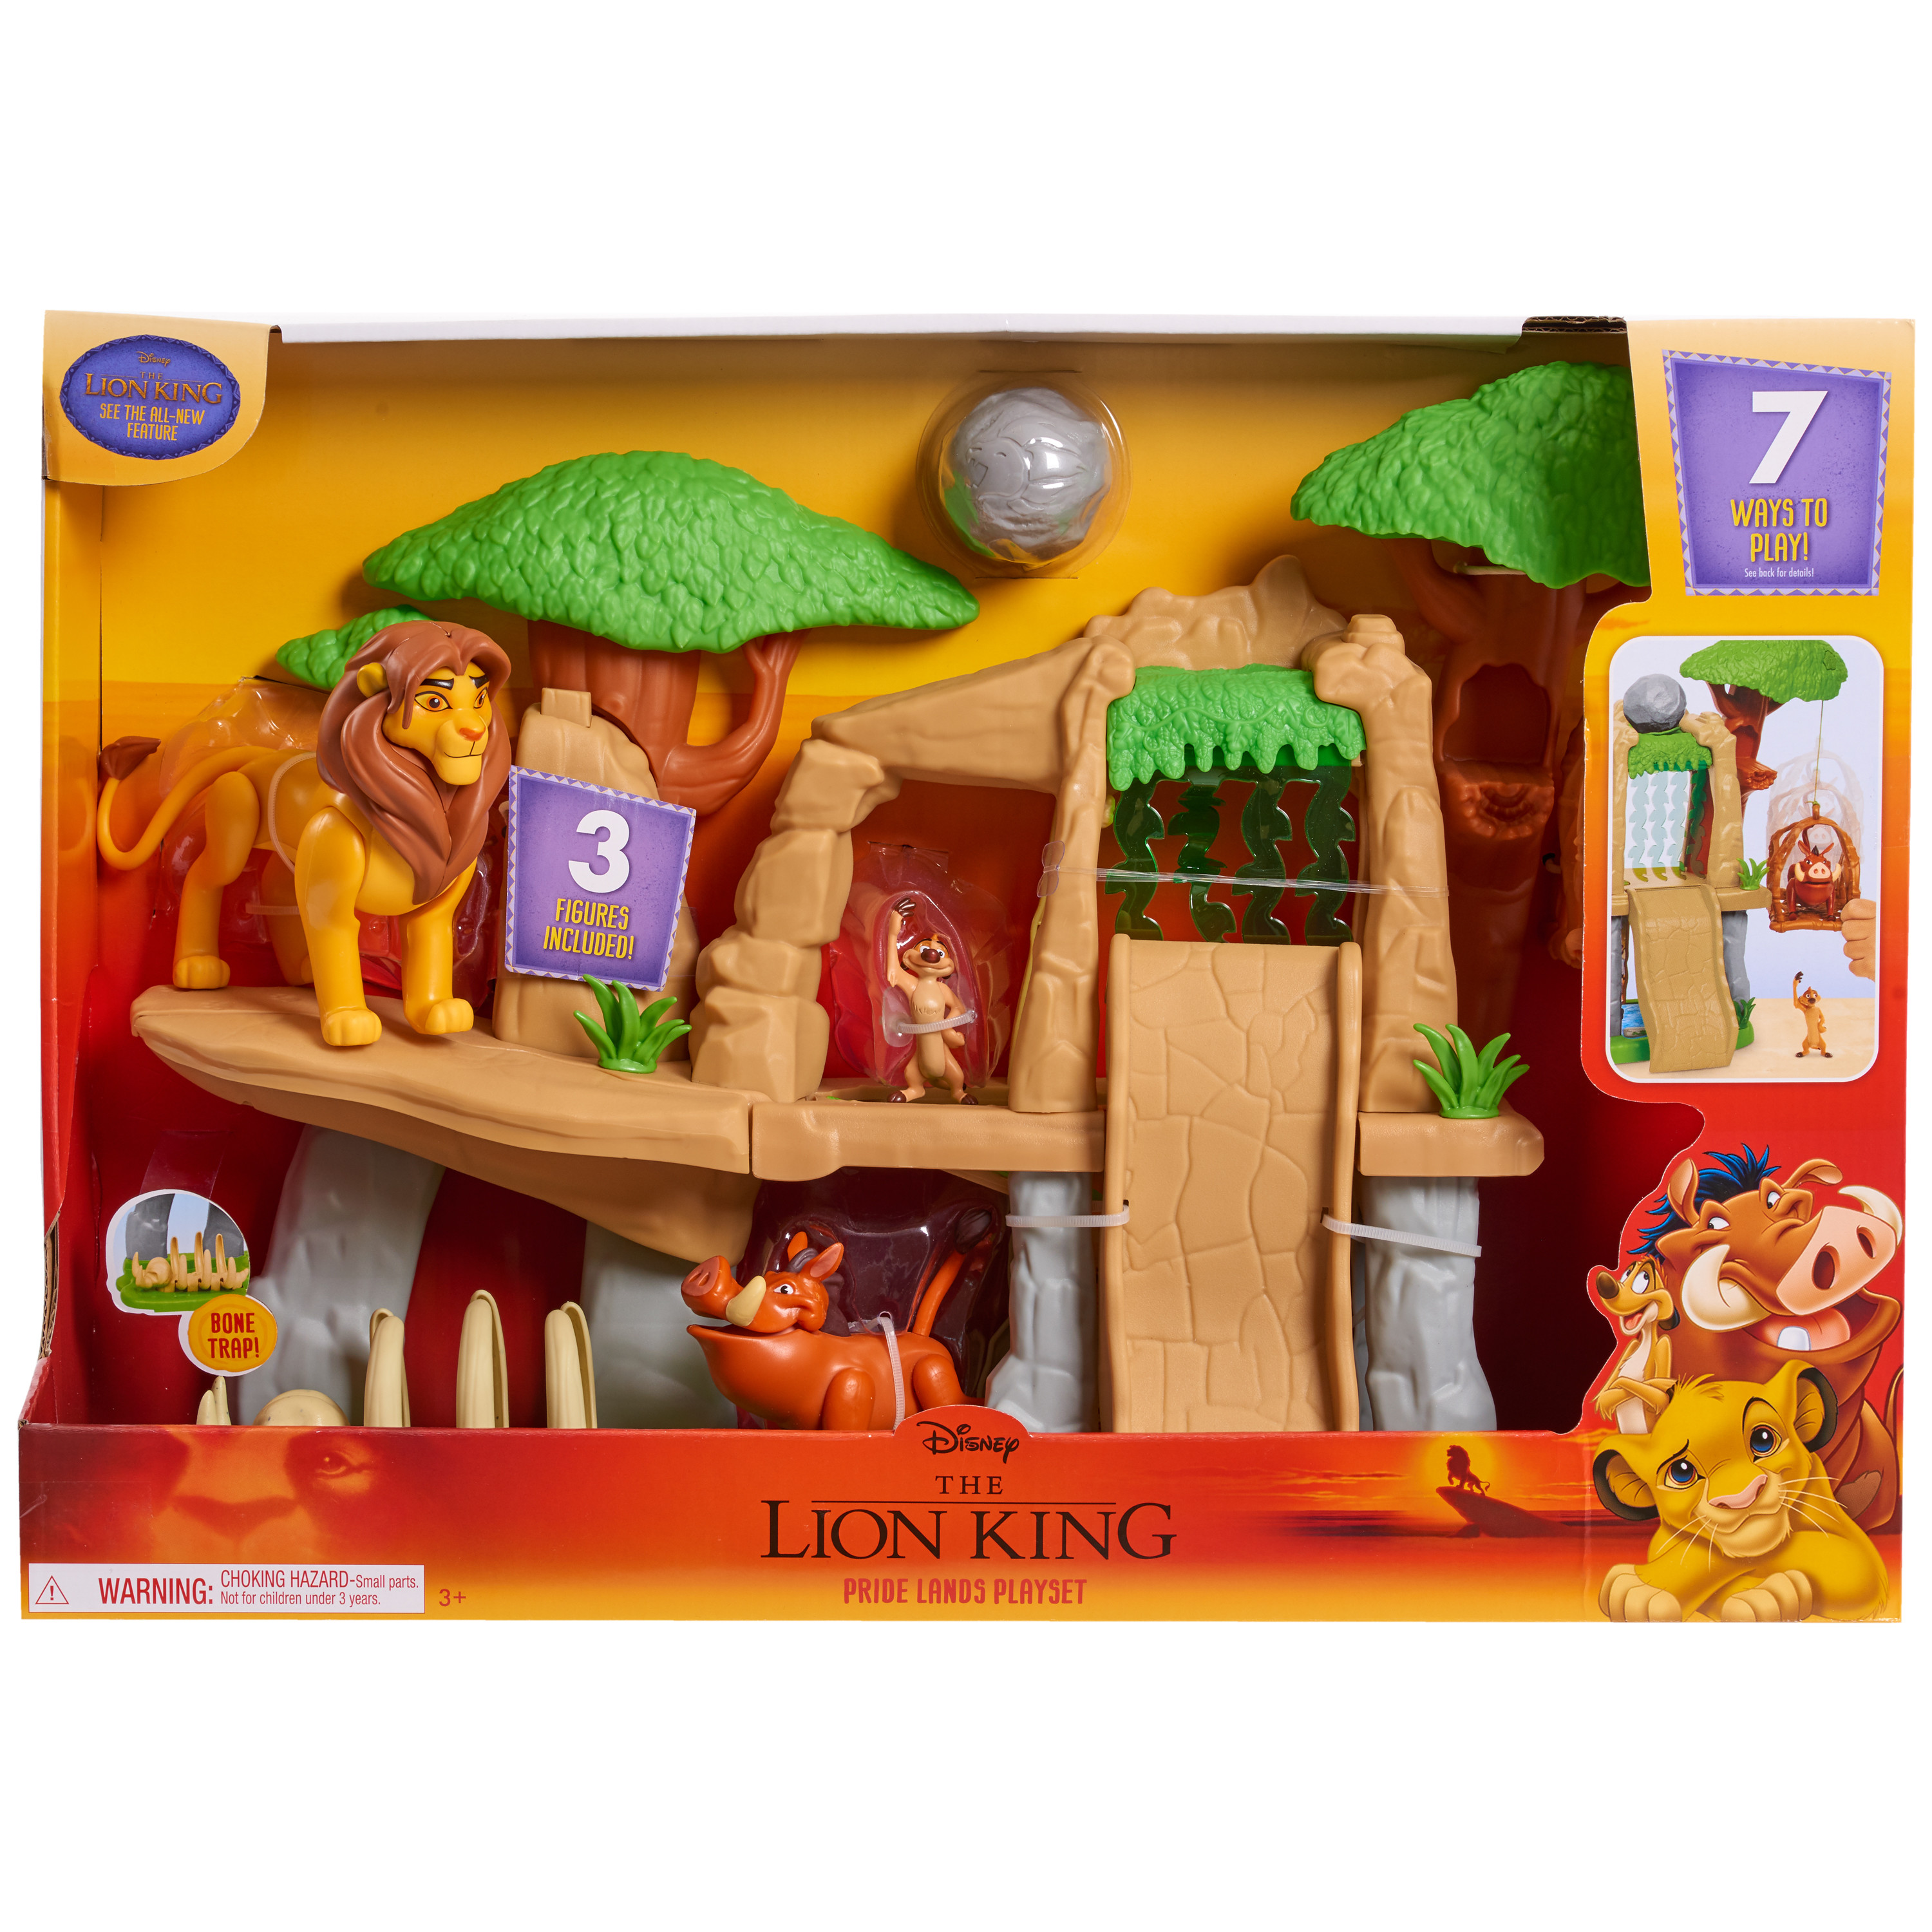 Disney the Lion King Pride Land Playset, Officially Licensed Kids Toys for Ages 3 Up, Gifts and Presents - image 3 of 3